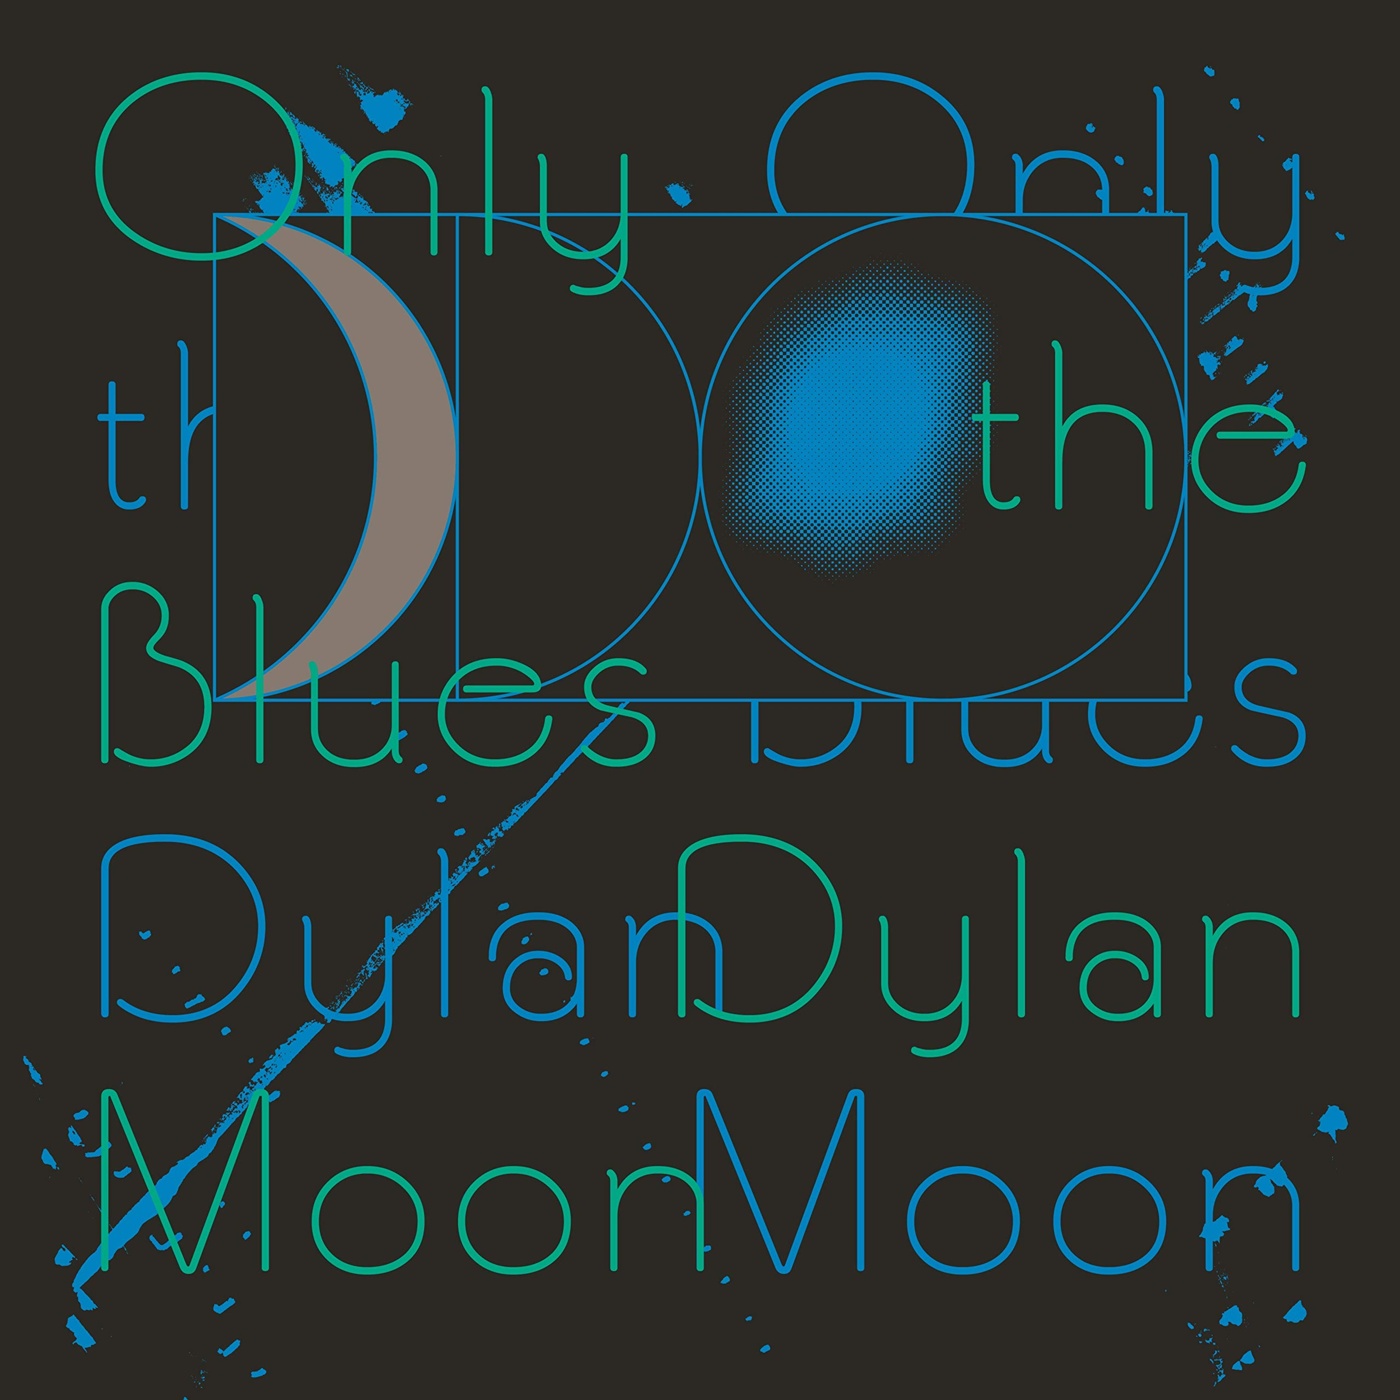 Only moon. Iris Moonlight Dylan аватарка. Iris Moonlight Dylan команды. Dylan Moon the Blues for yesterday Vol.02.